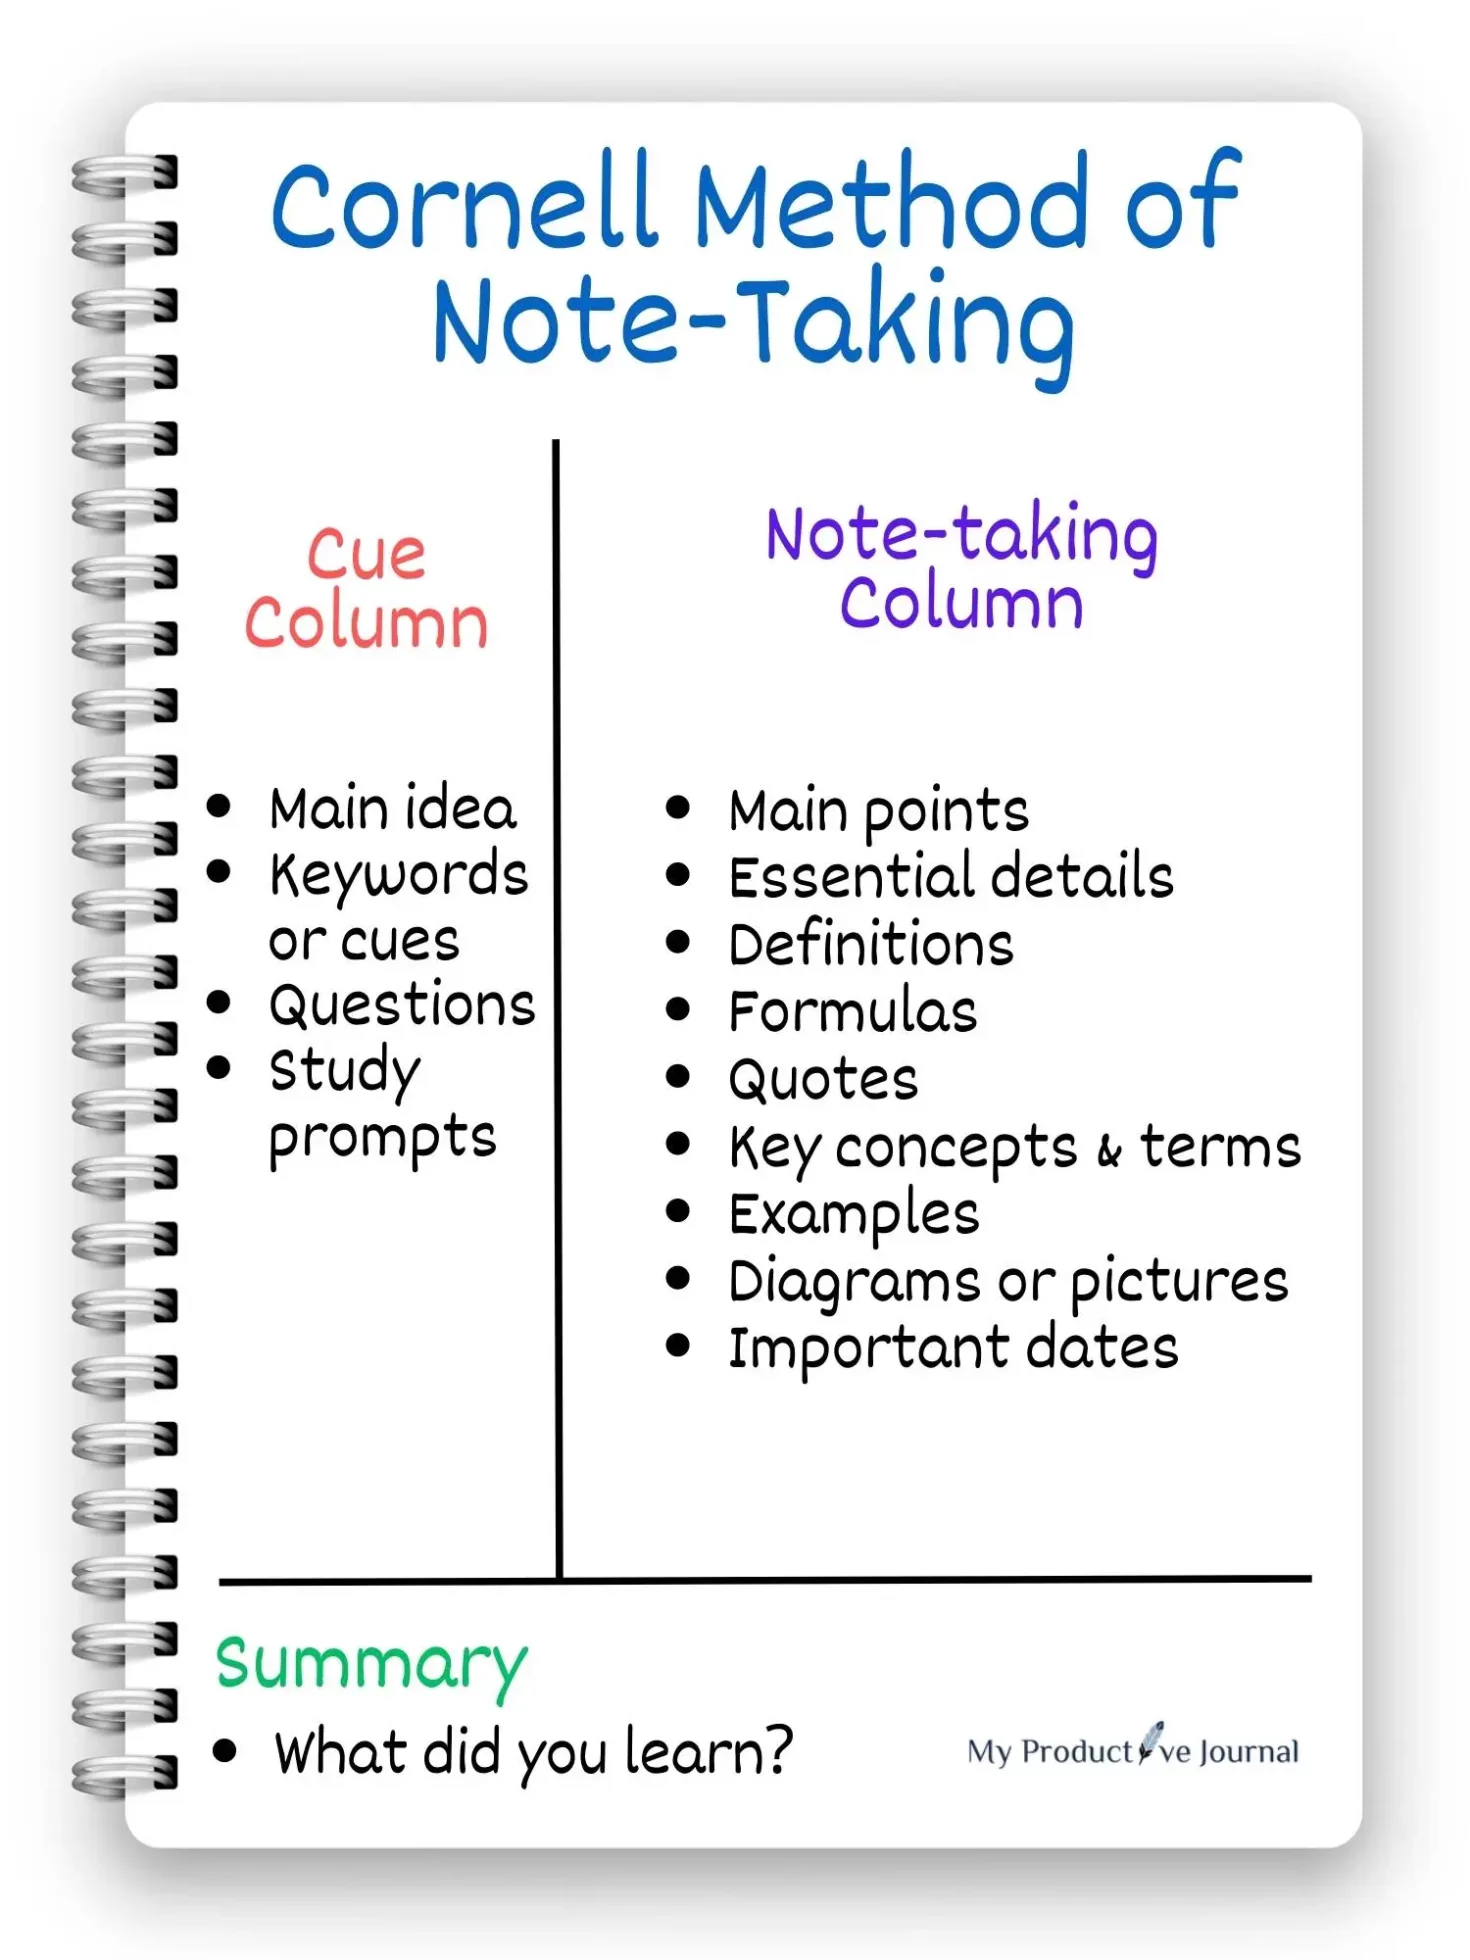 The Cornell Method of note taking is one of the best ways to organize meeting notes efficiently